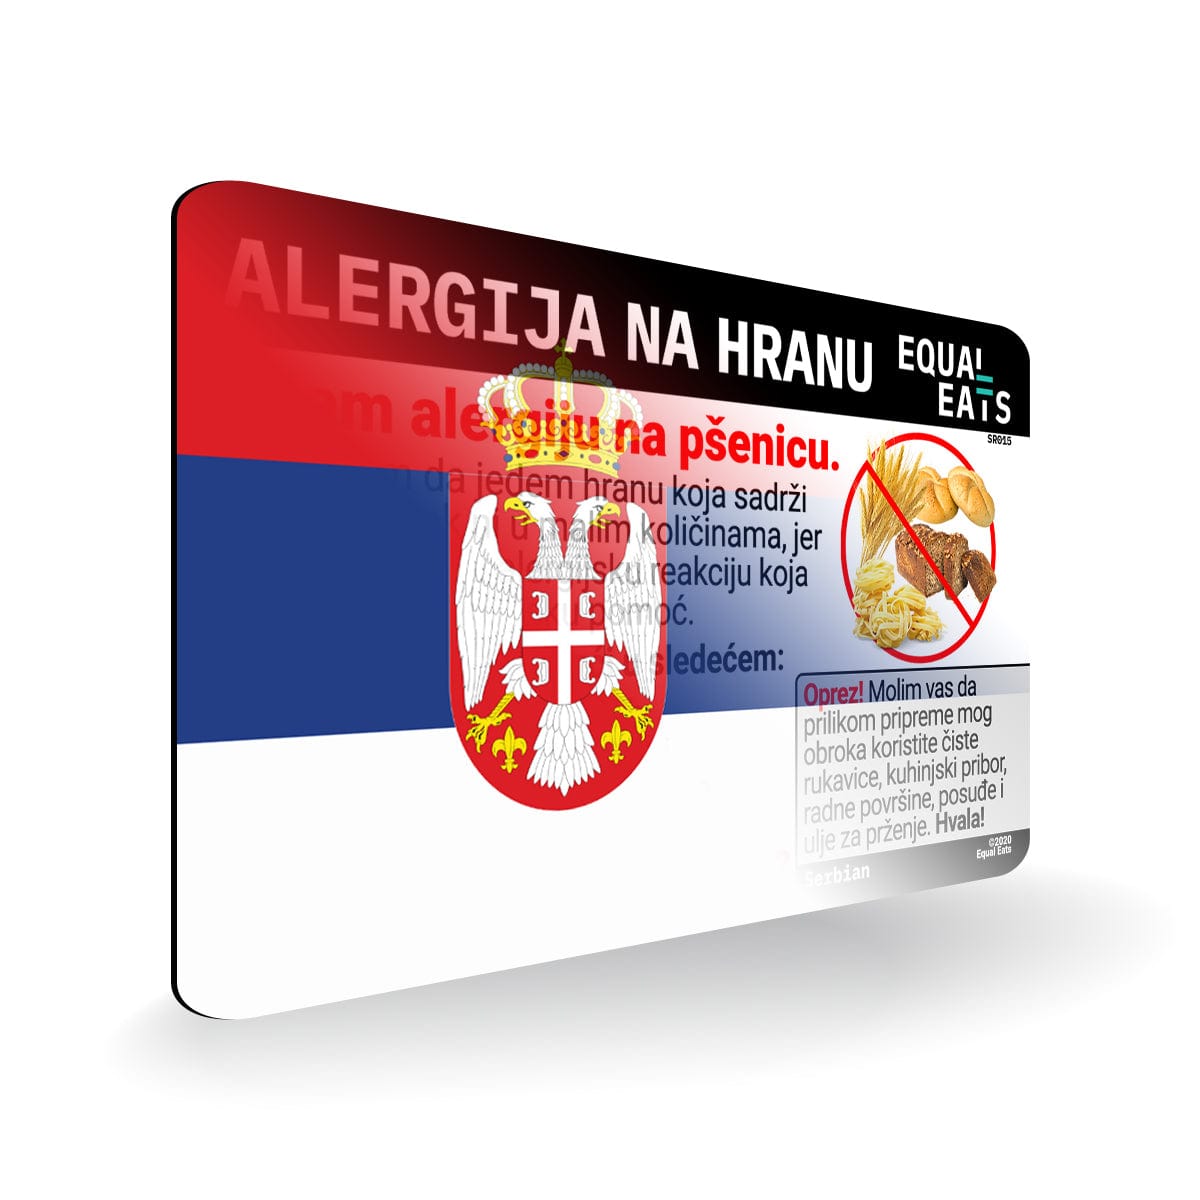 Wheat Allergy in Serbian. Wheat Allergy Card for Serbia